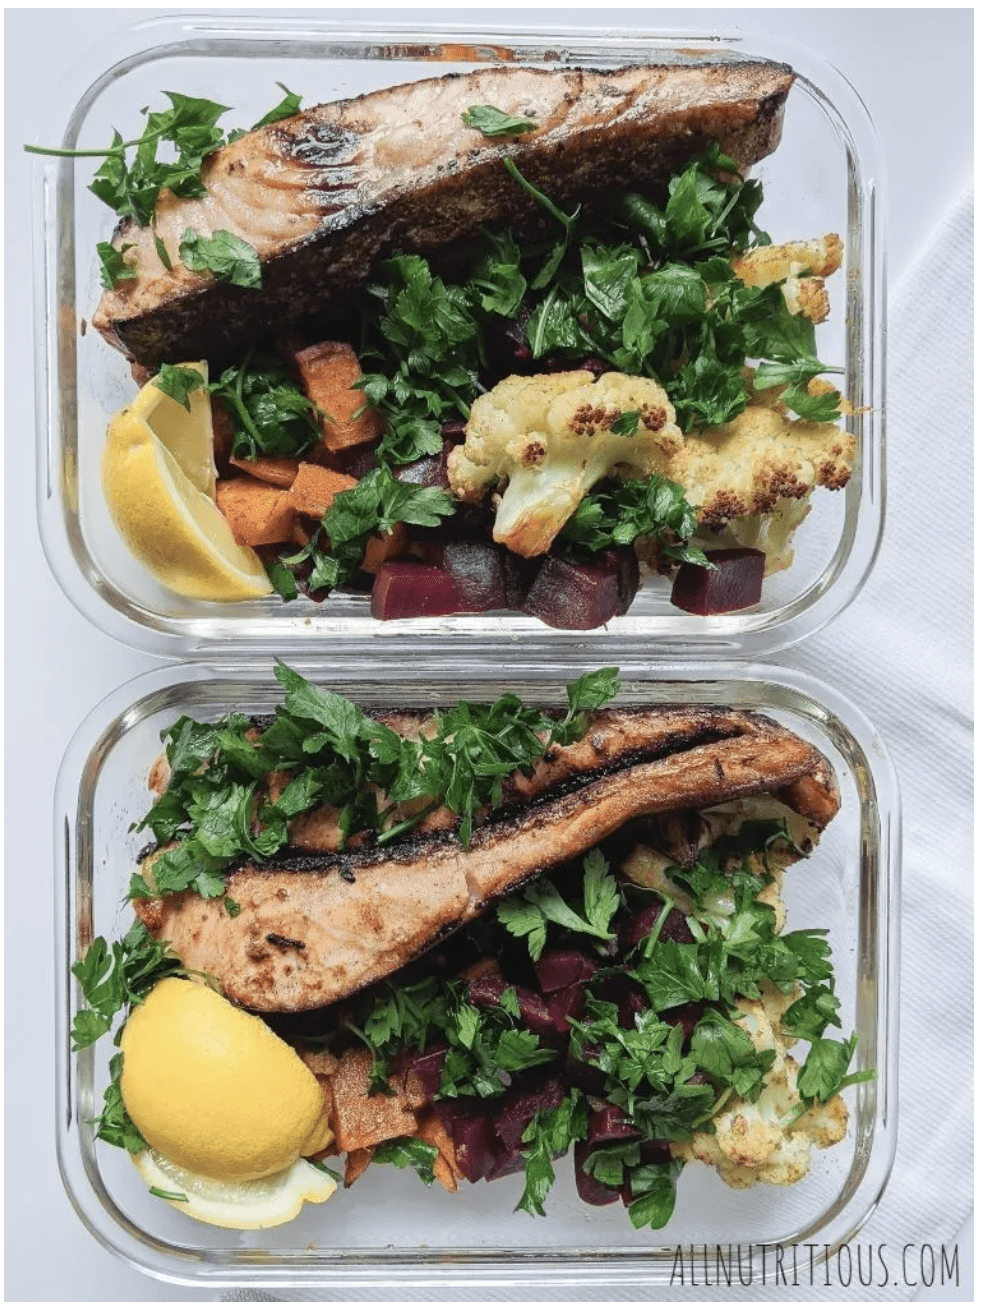 In just under 40 minutes, you can have this high protein salmon meal prep ready for the days to come. These salmon bowls come with vegetables that are packed with nutrients.

The recipe is high protein, dairy-free, and gluten-free.